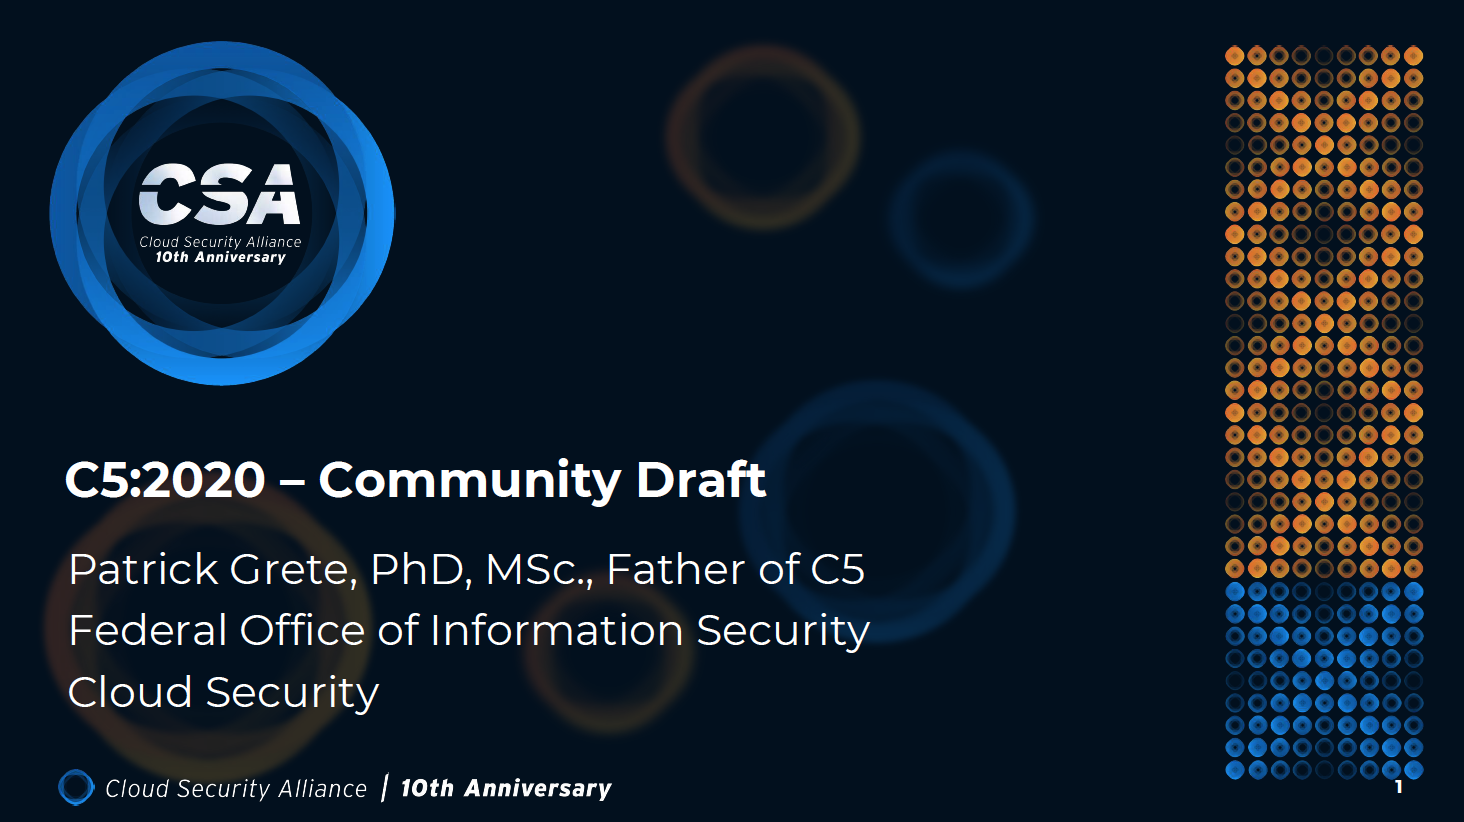 The Community Draft of the Revised C5 - Dr. Patrick Grete